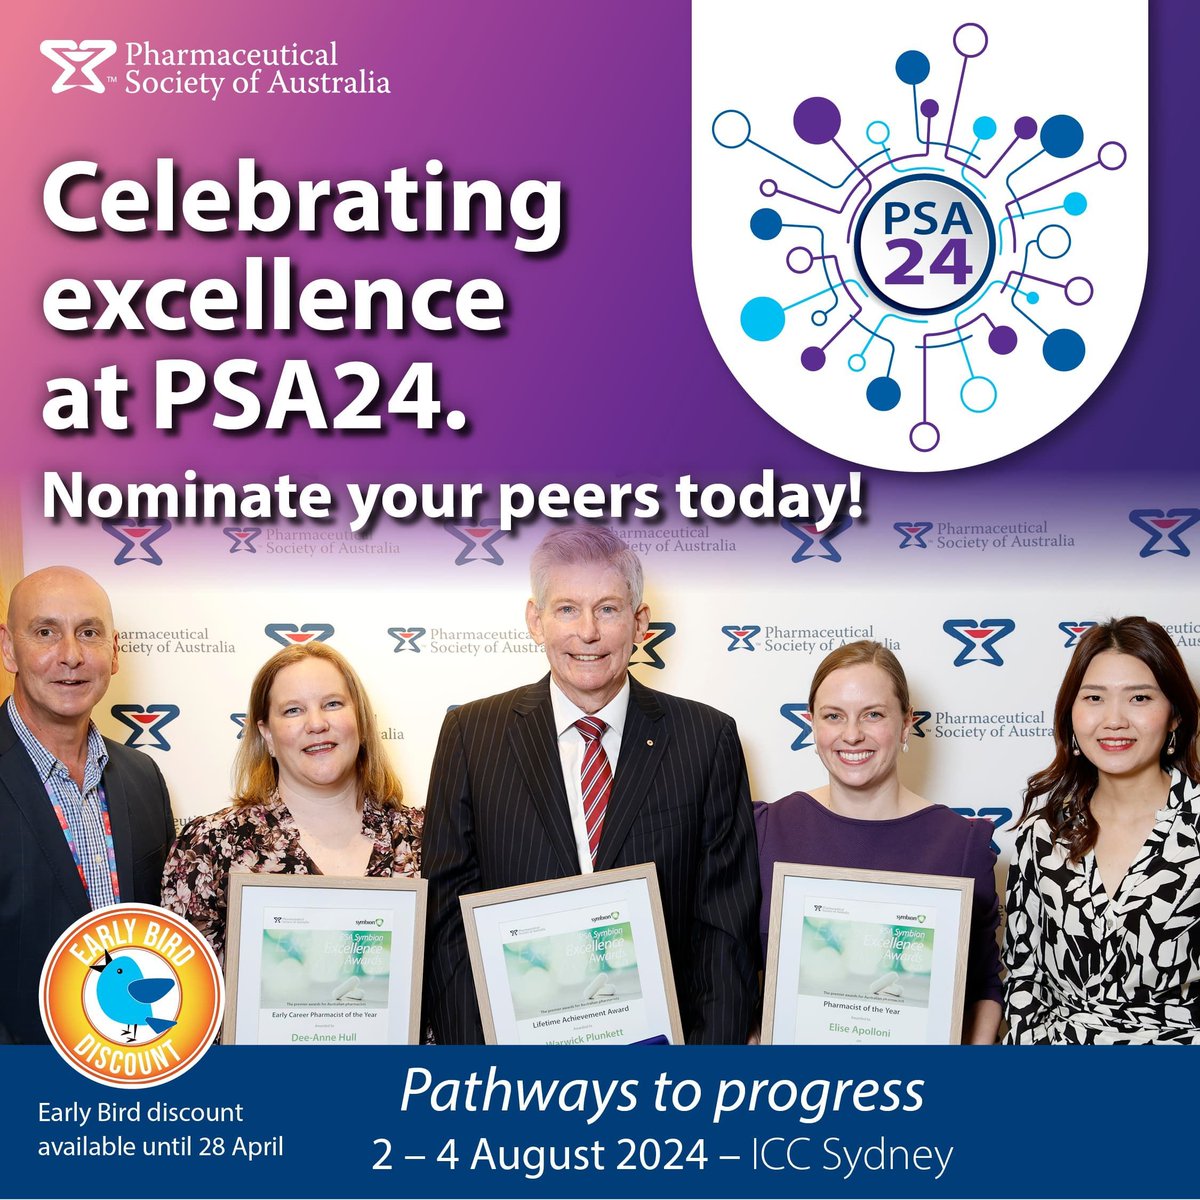 Are you or someone you know pushing the boundaries in pharmacy? Nominate today and let's celebrate the leaders among us. 👉 buff.ly/4aUymwe #PSA24 #PSAExcellenceAwards